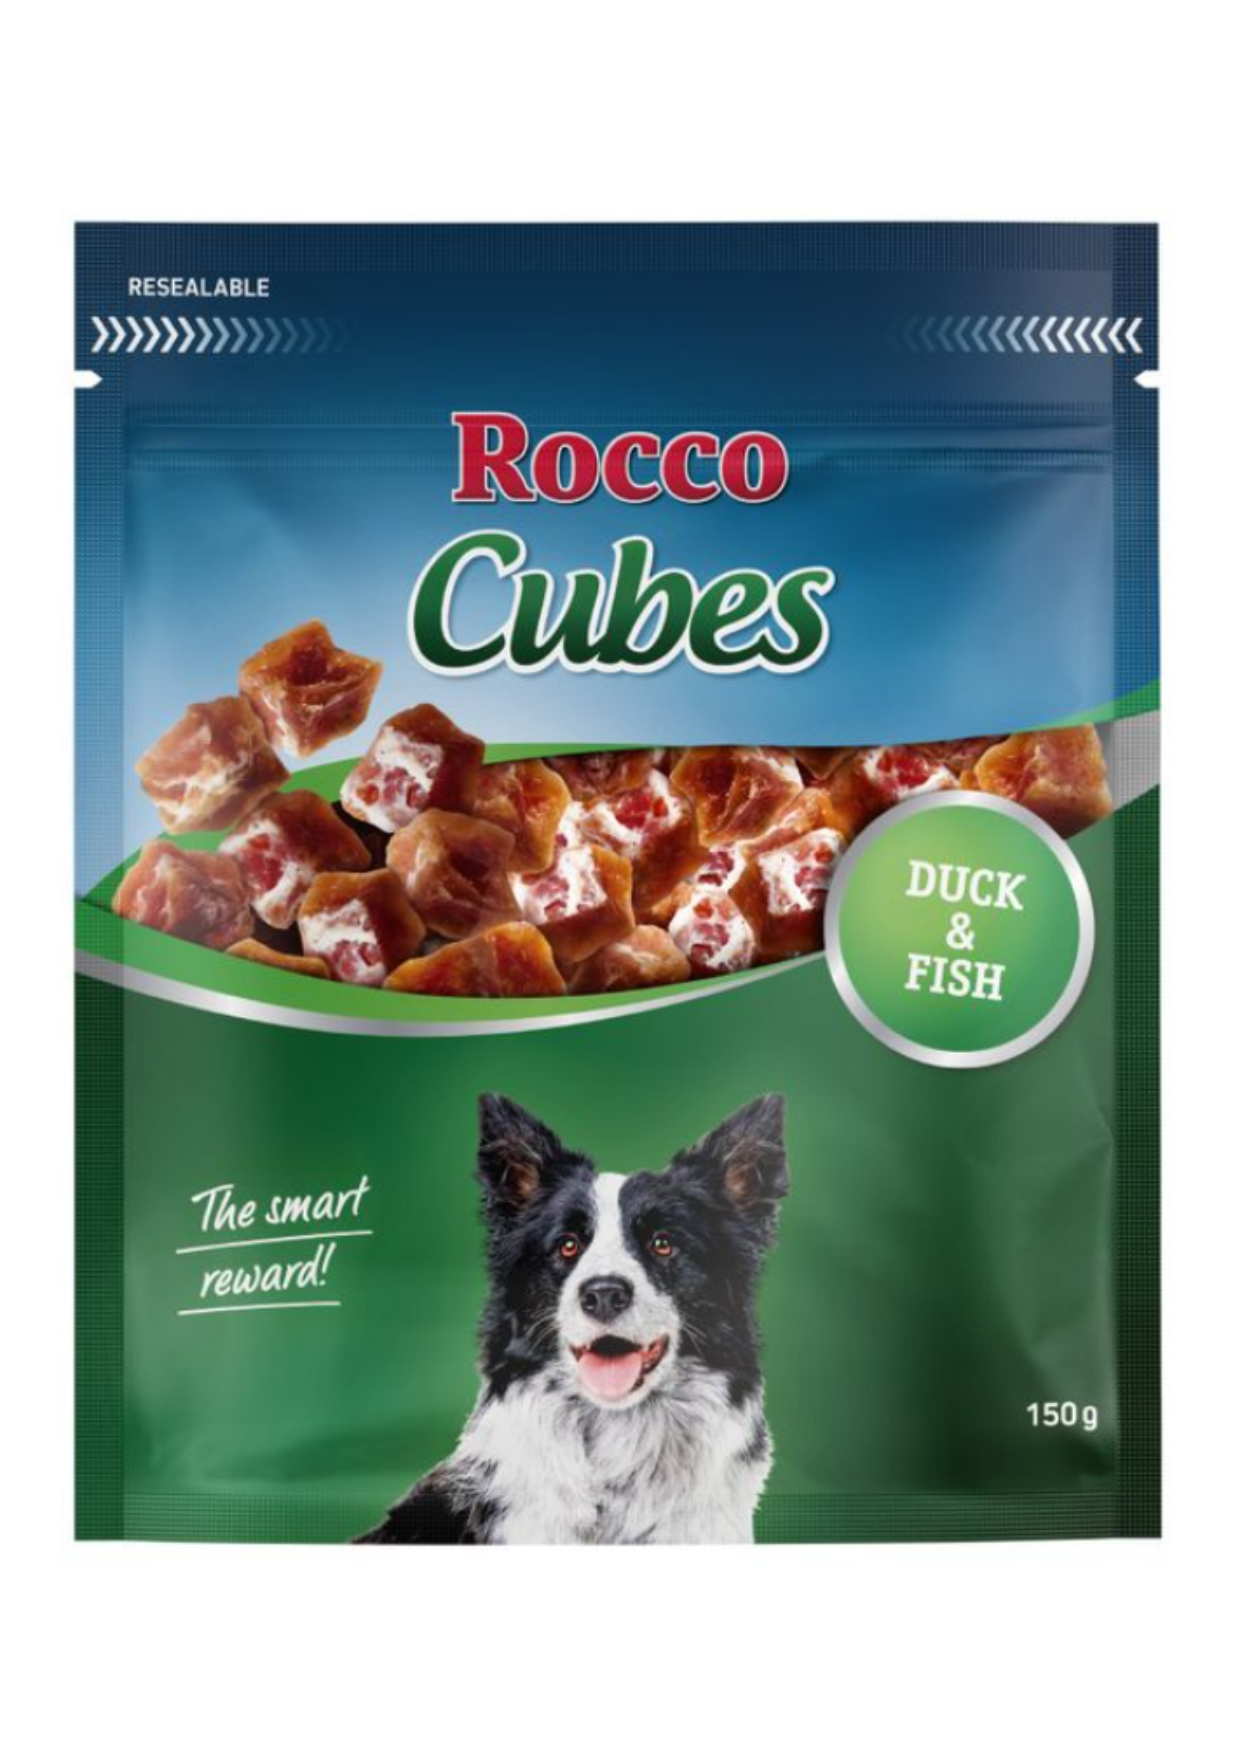 Rocco Cubes - Duck & Fish